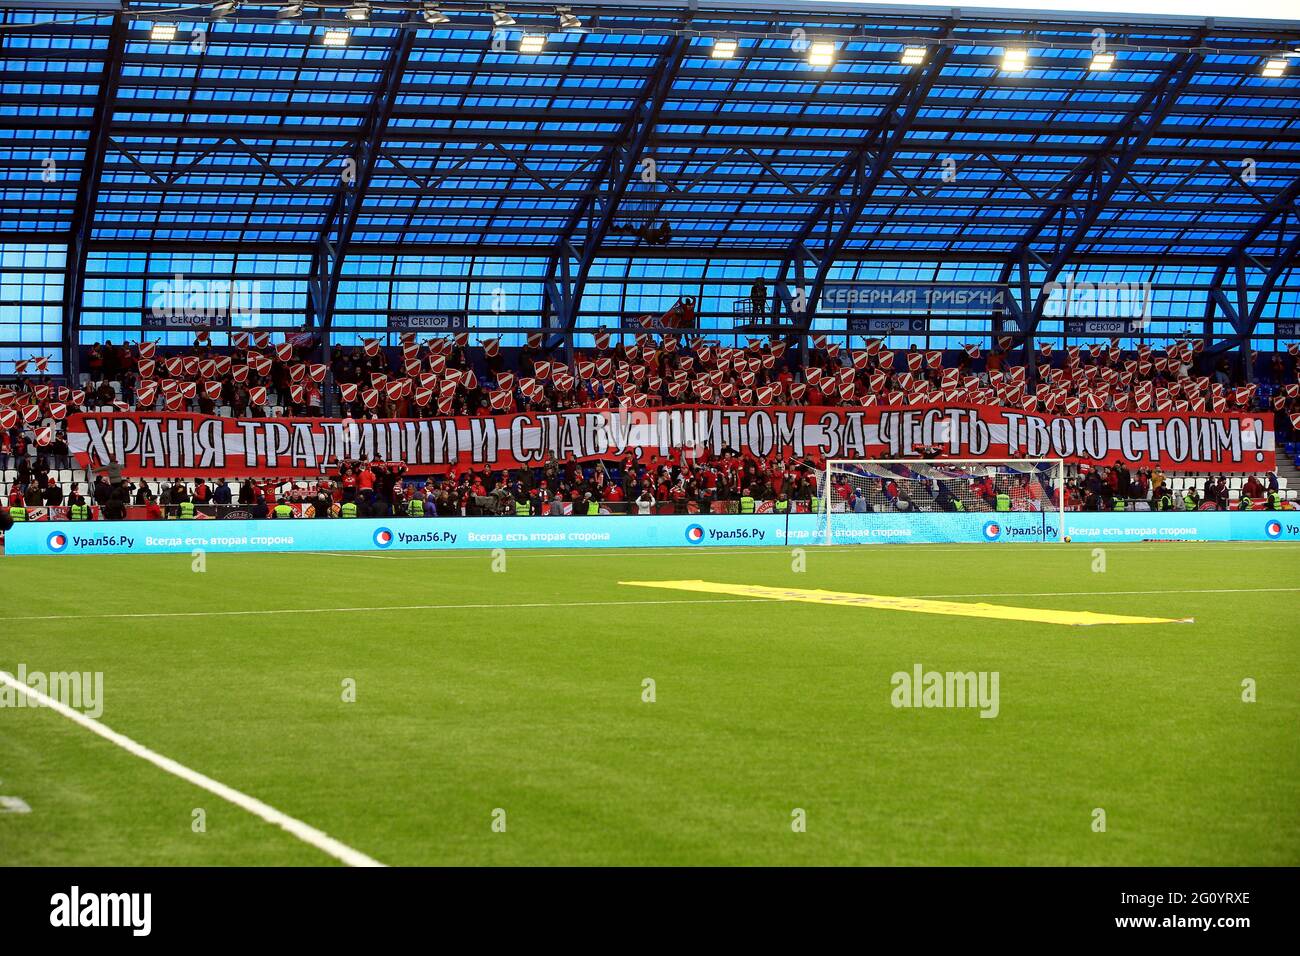 MOSCOW, RUSSIA, MARCH 13, 2021. The 2020/21 Russian Football Premier  League. Round 22. Football match between Dinamo (Moscow) vs Spartak (Moscow)  at VTB Arena. Photo by Stupnikov Alexander/FC Spartak Stock Photo - Alamy